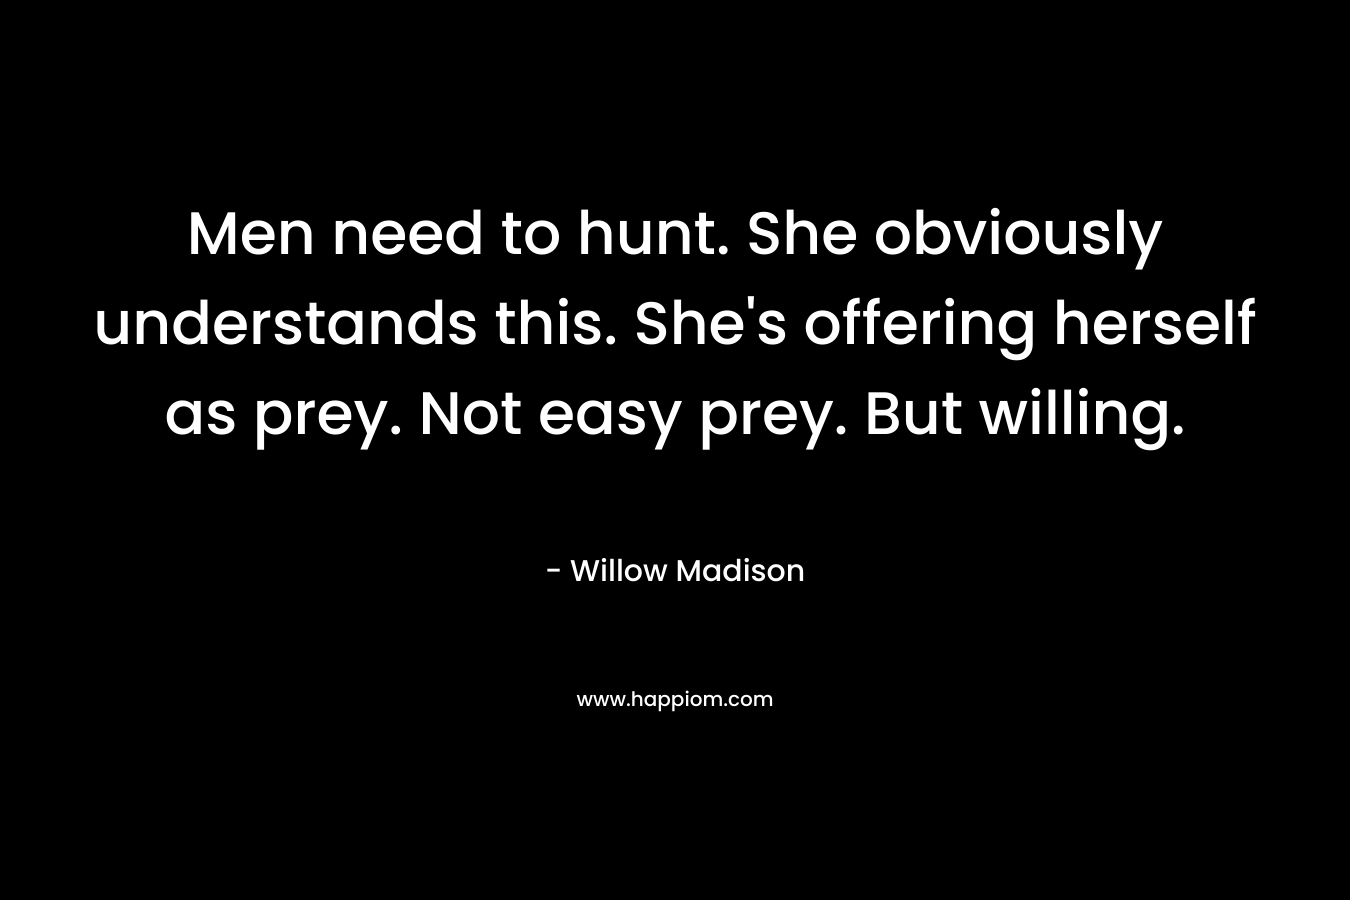 Men need to hunt. She obviously understands this. She’s offering herself as prey. Not easy prey. But willing. – Willow Madison